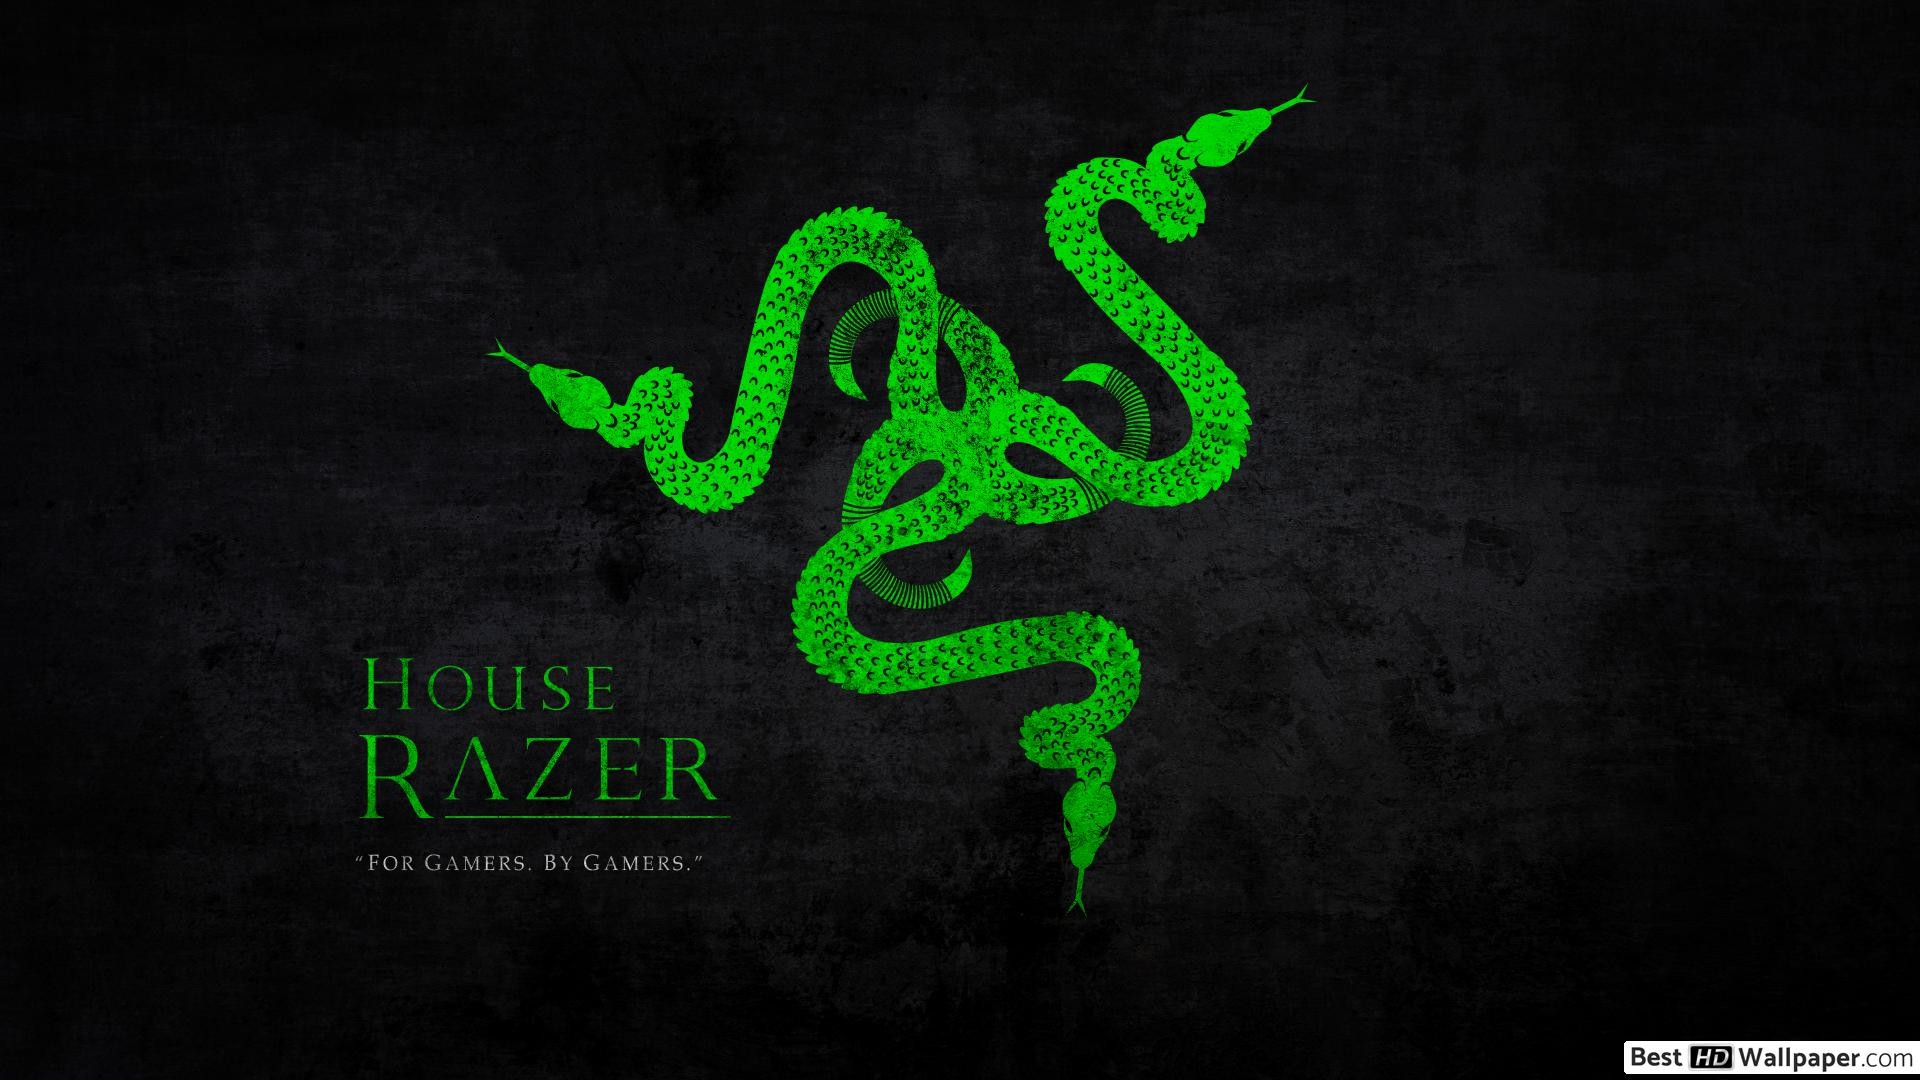 1920x1080 Download House razer for gamers by gamer wallpaper